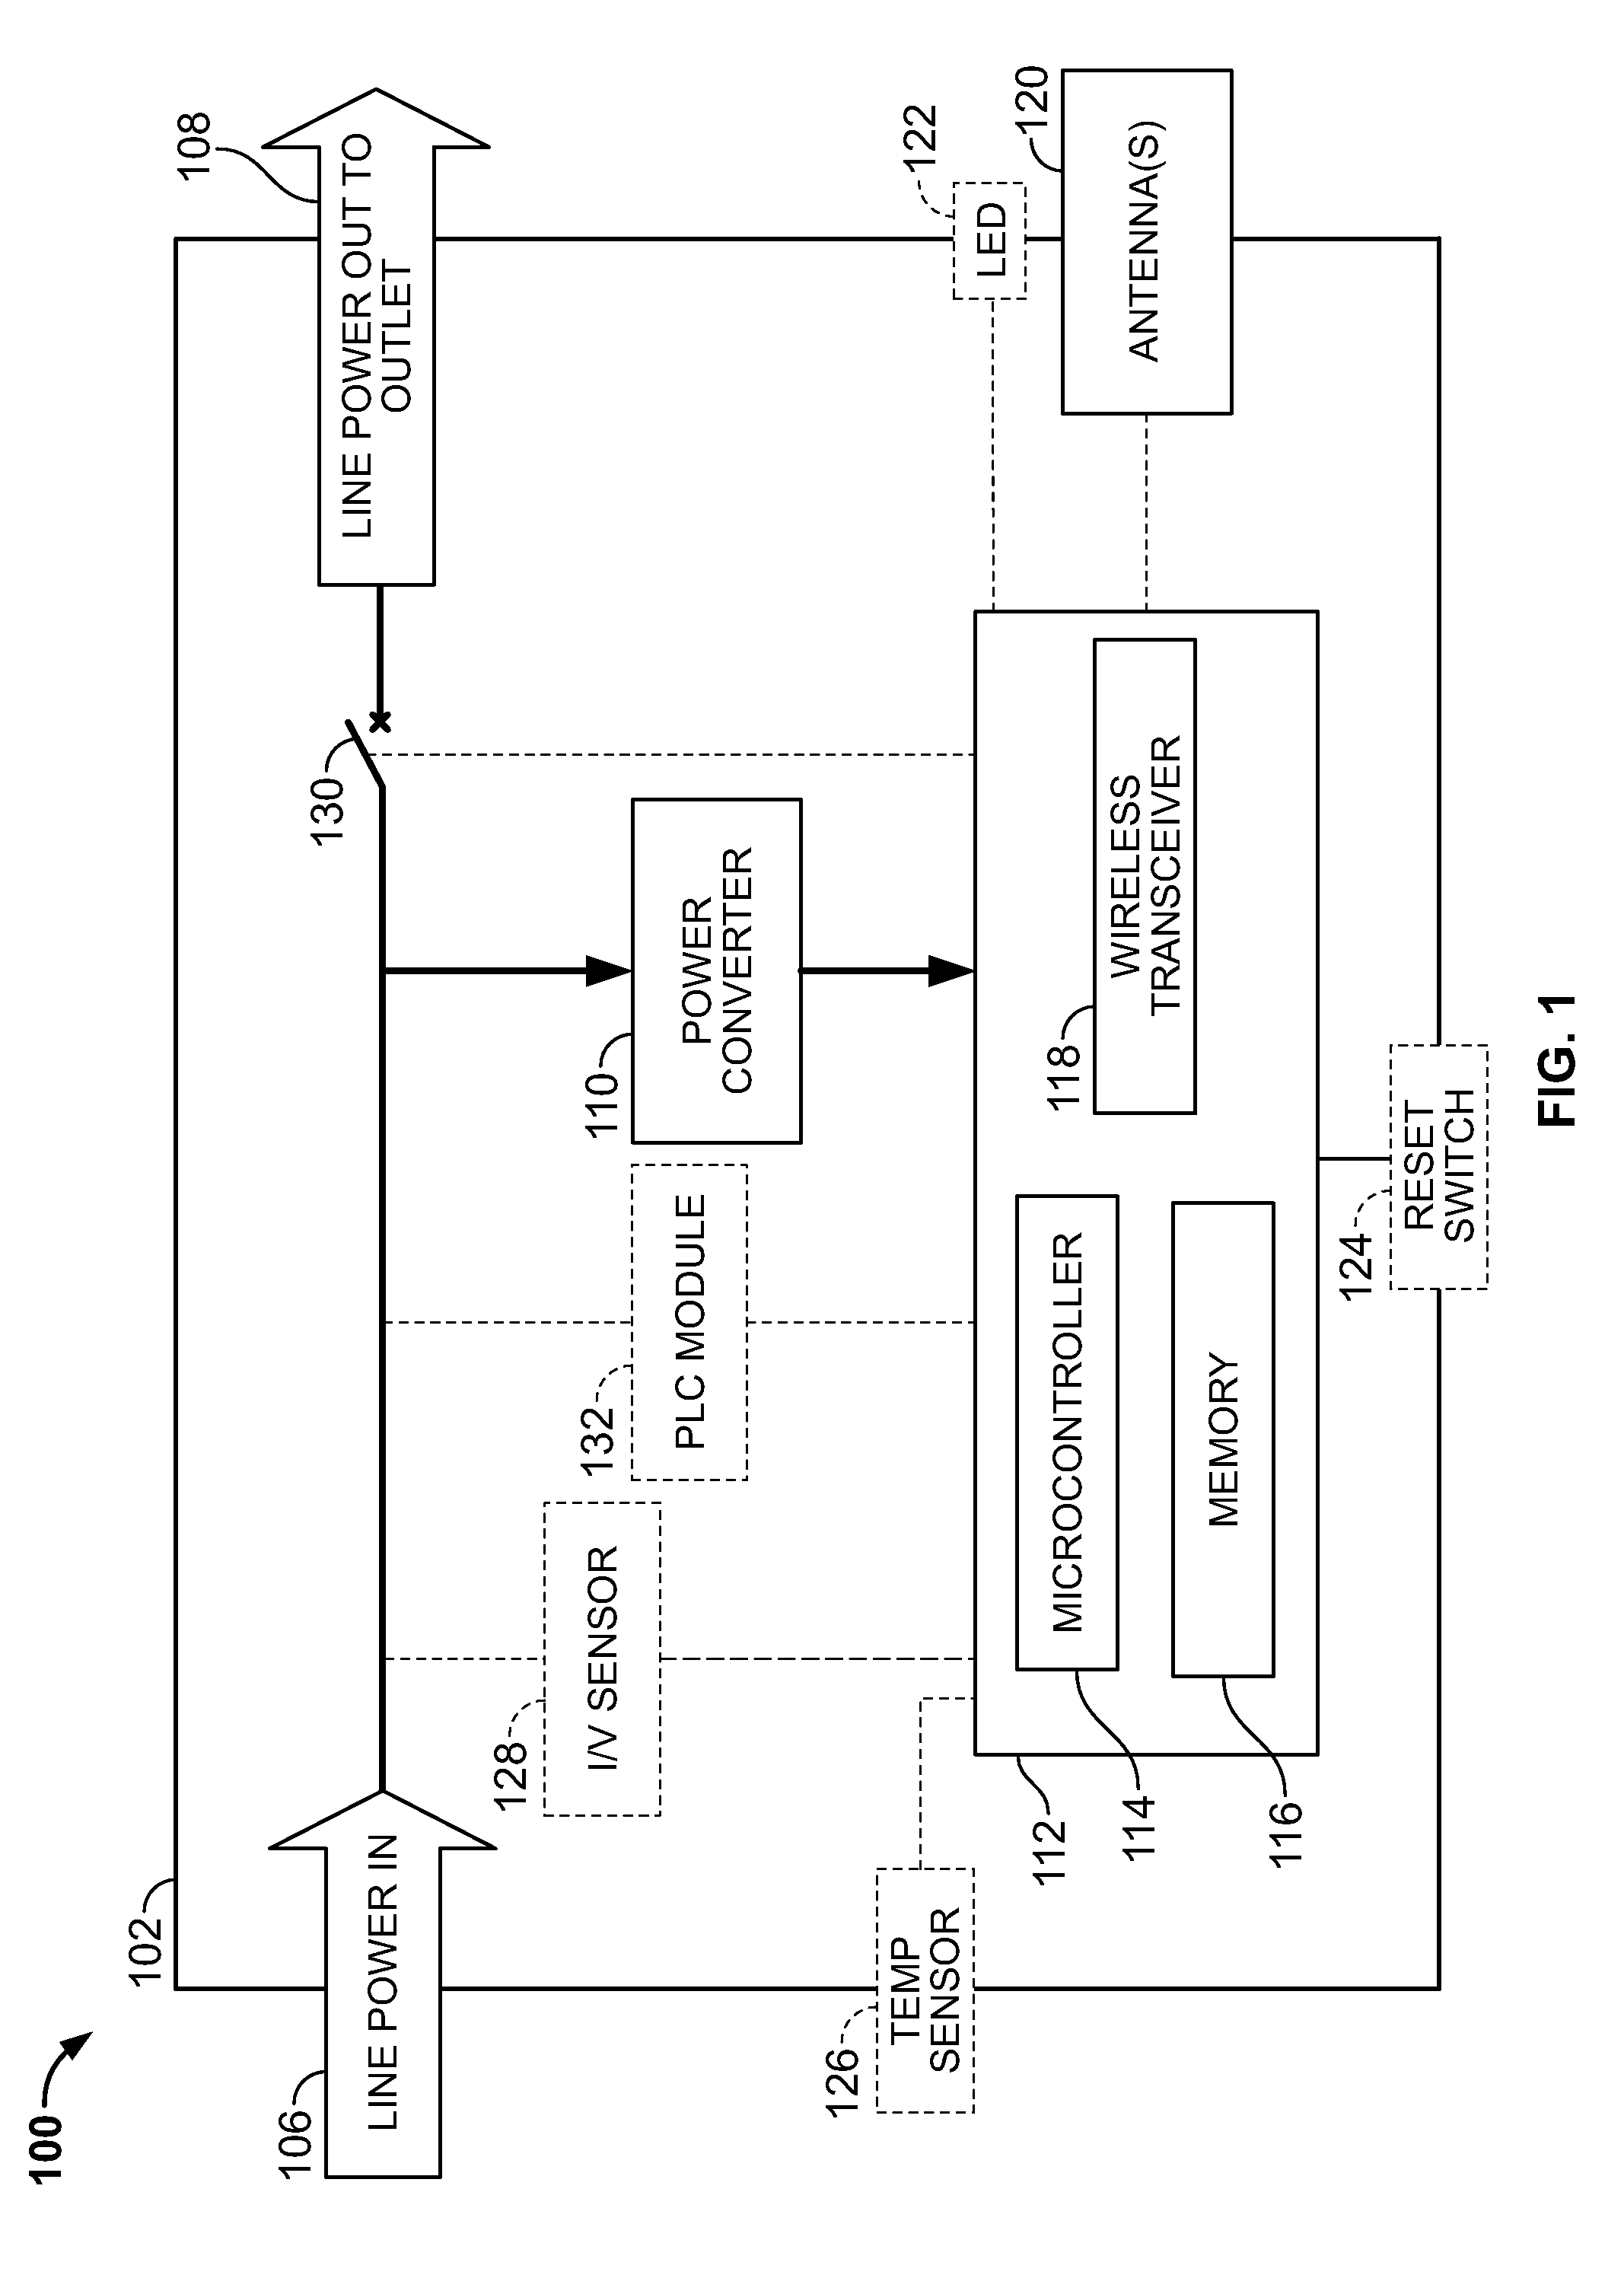 Wireless transceiver within an electrical receptacle system